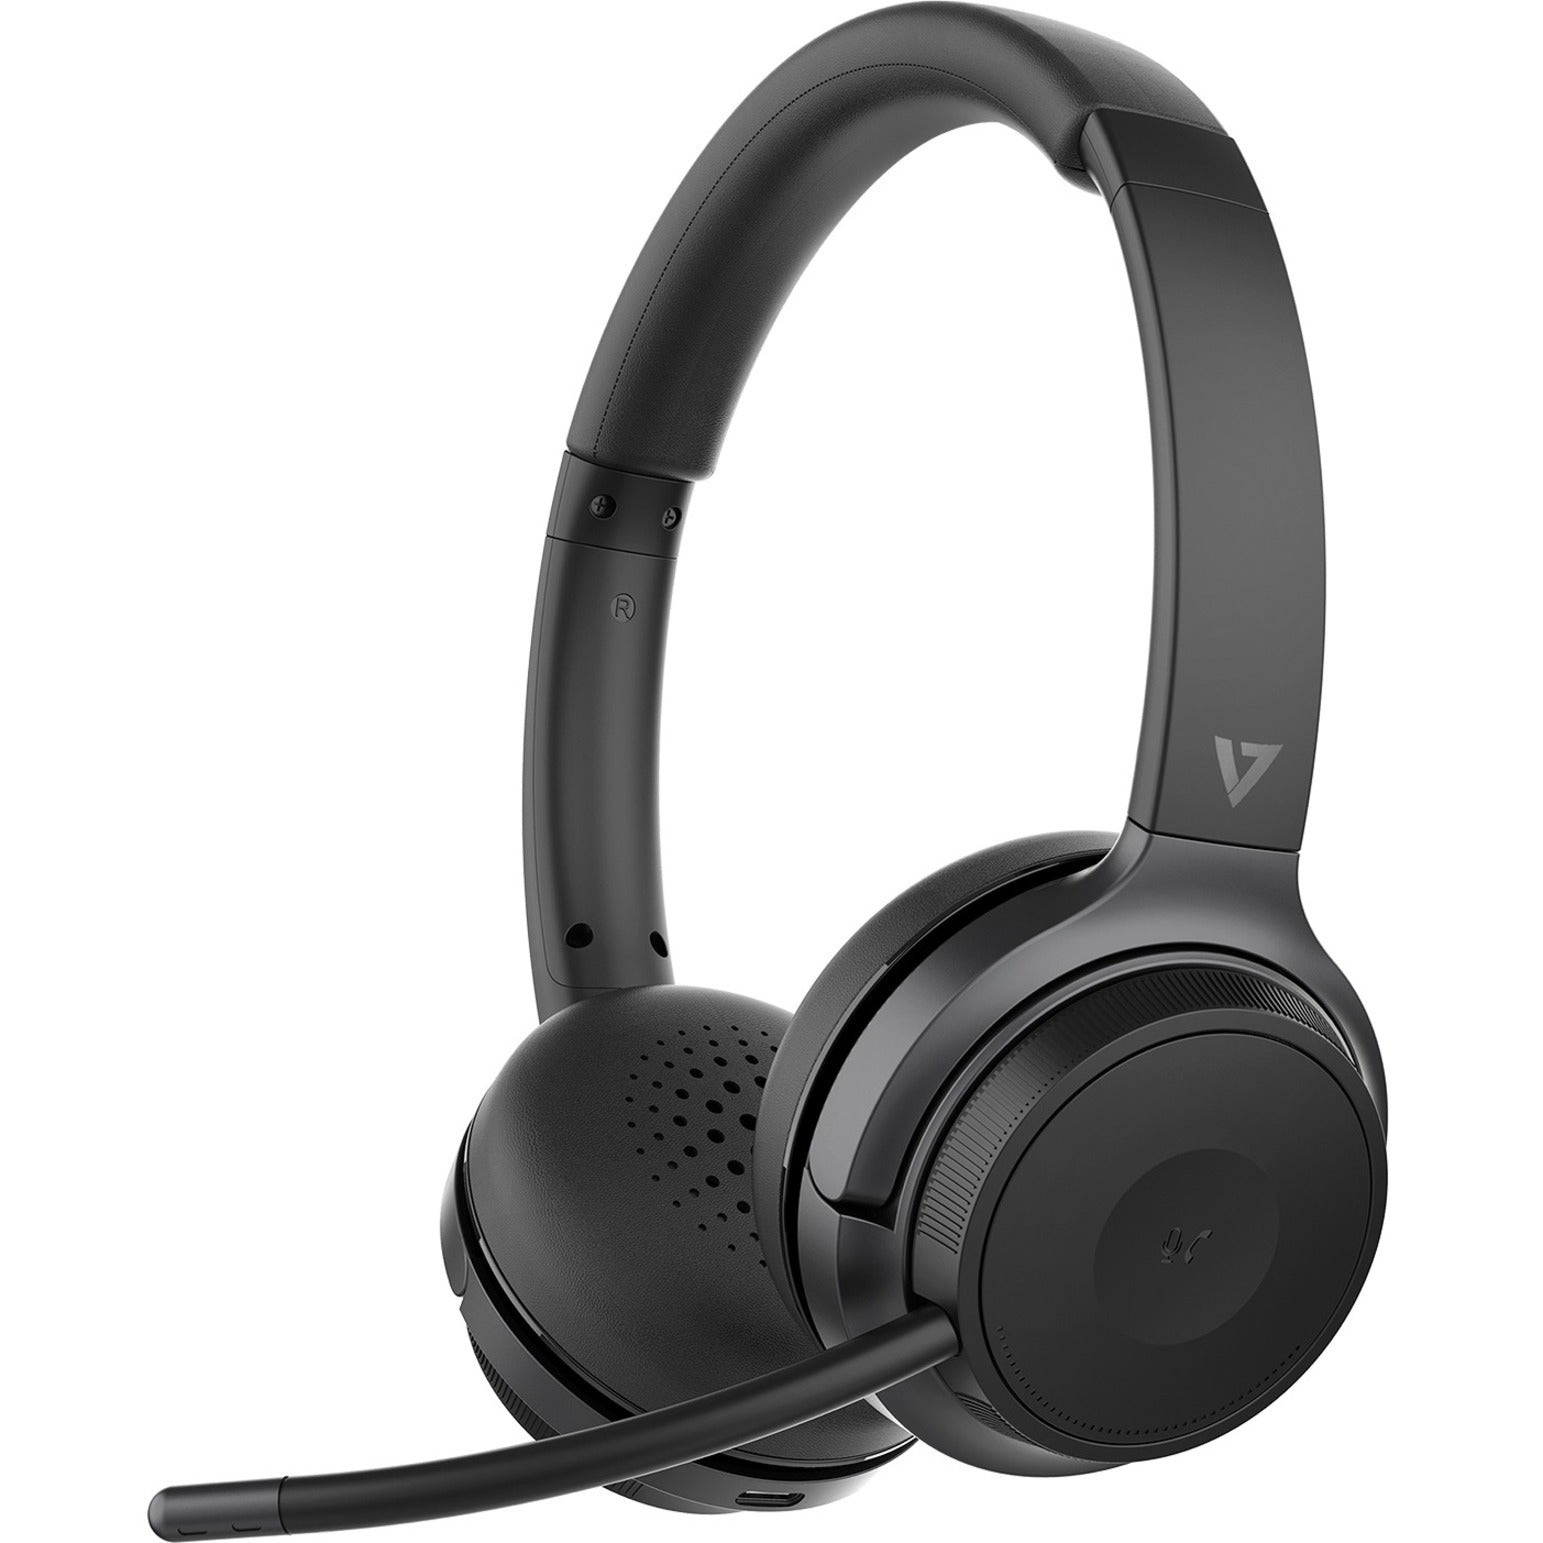 V7 HB600S Headset, Wireless Bluetooth 5 Stereo Headphones with Detachable Microphone, USB Charging, and 2-Year Warranty